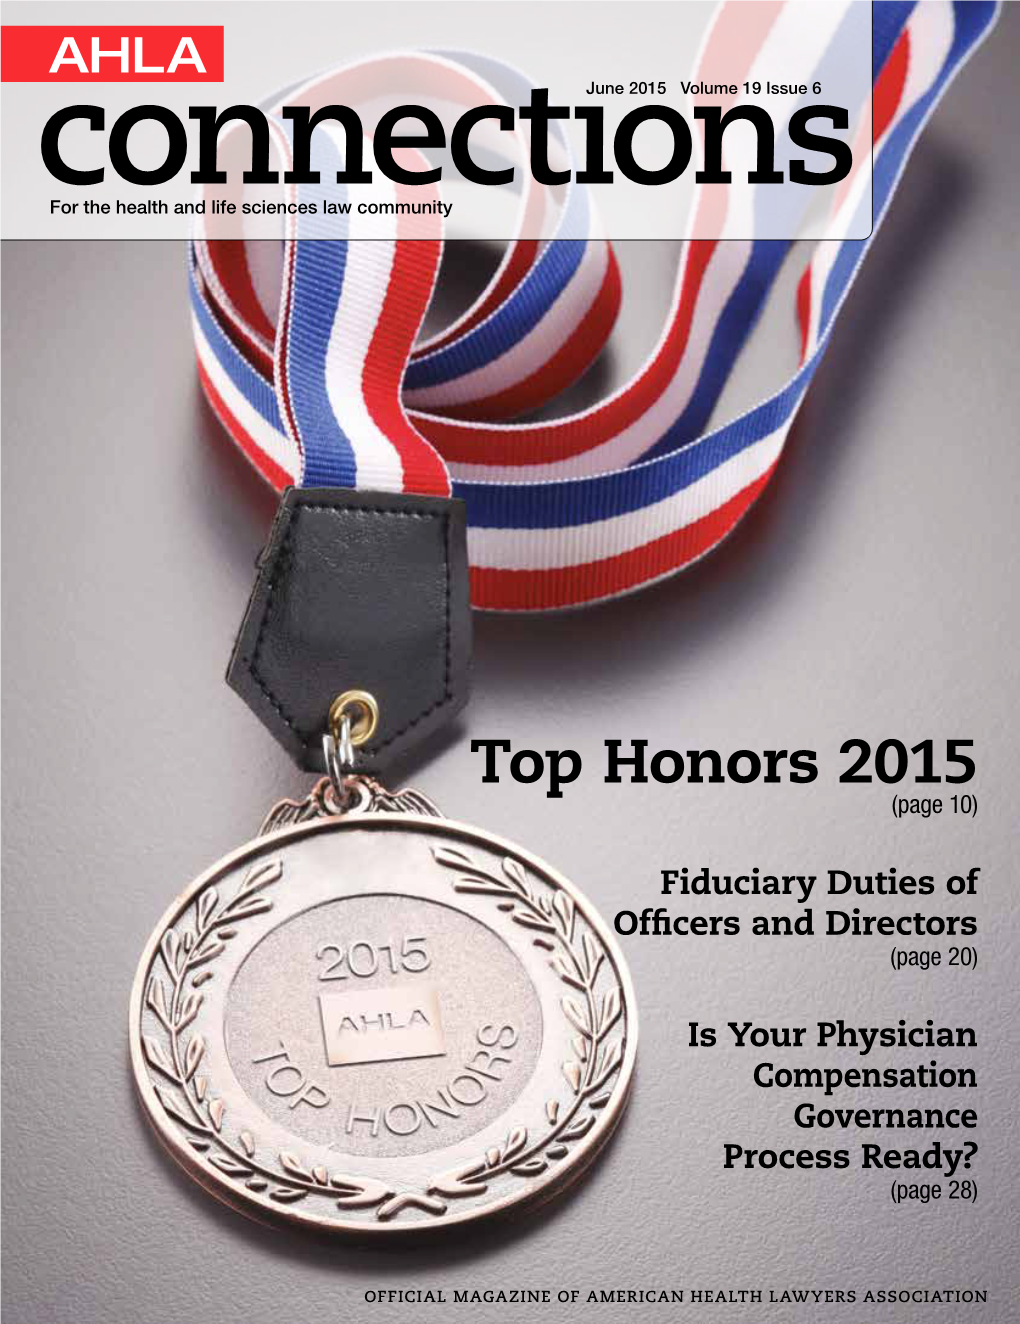 Top Honors 2015 (Page 10)